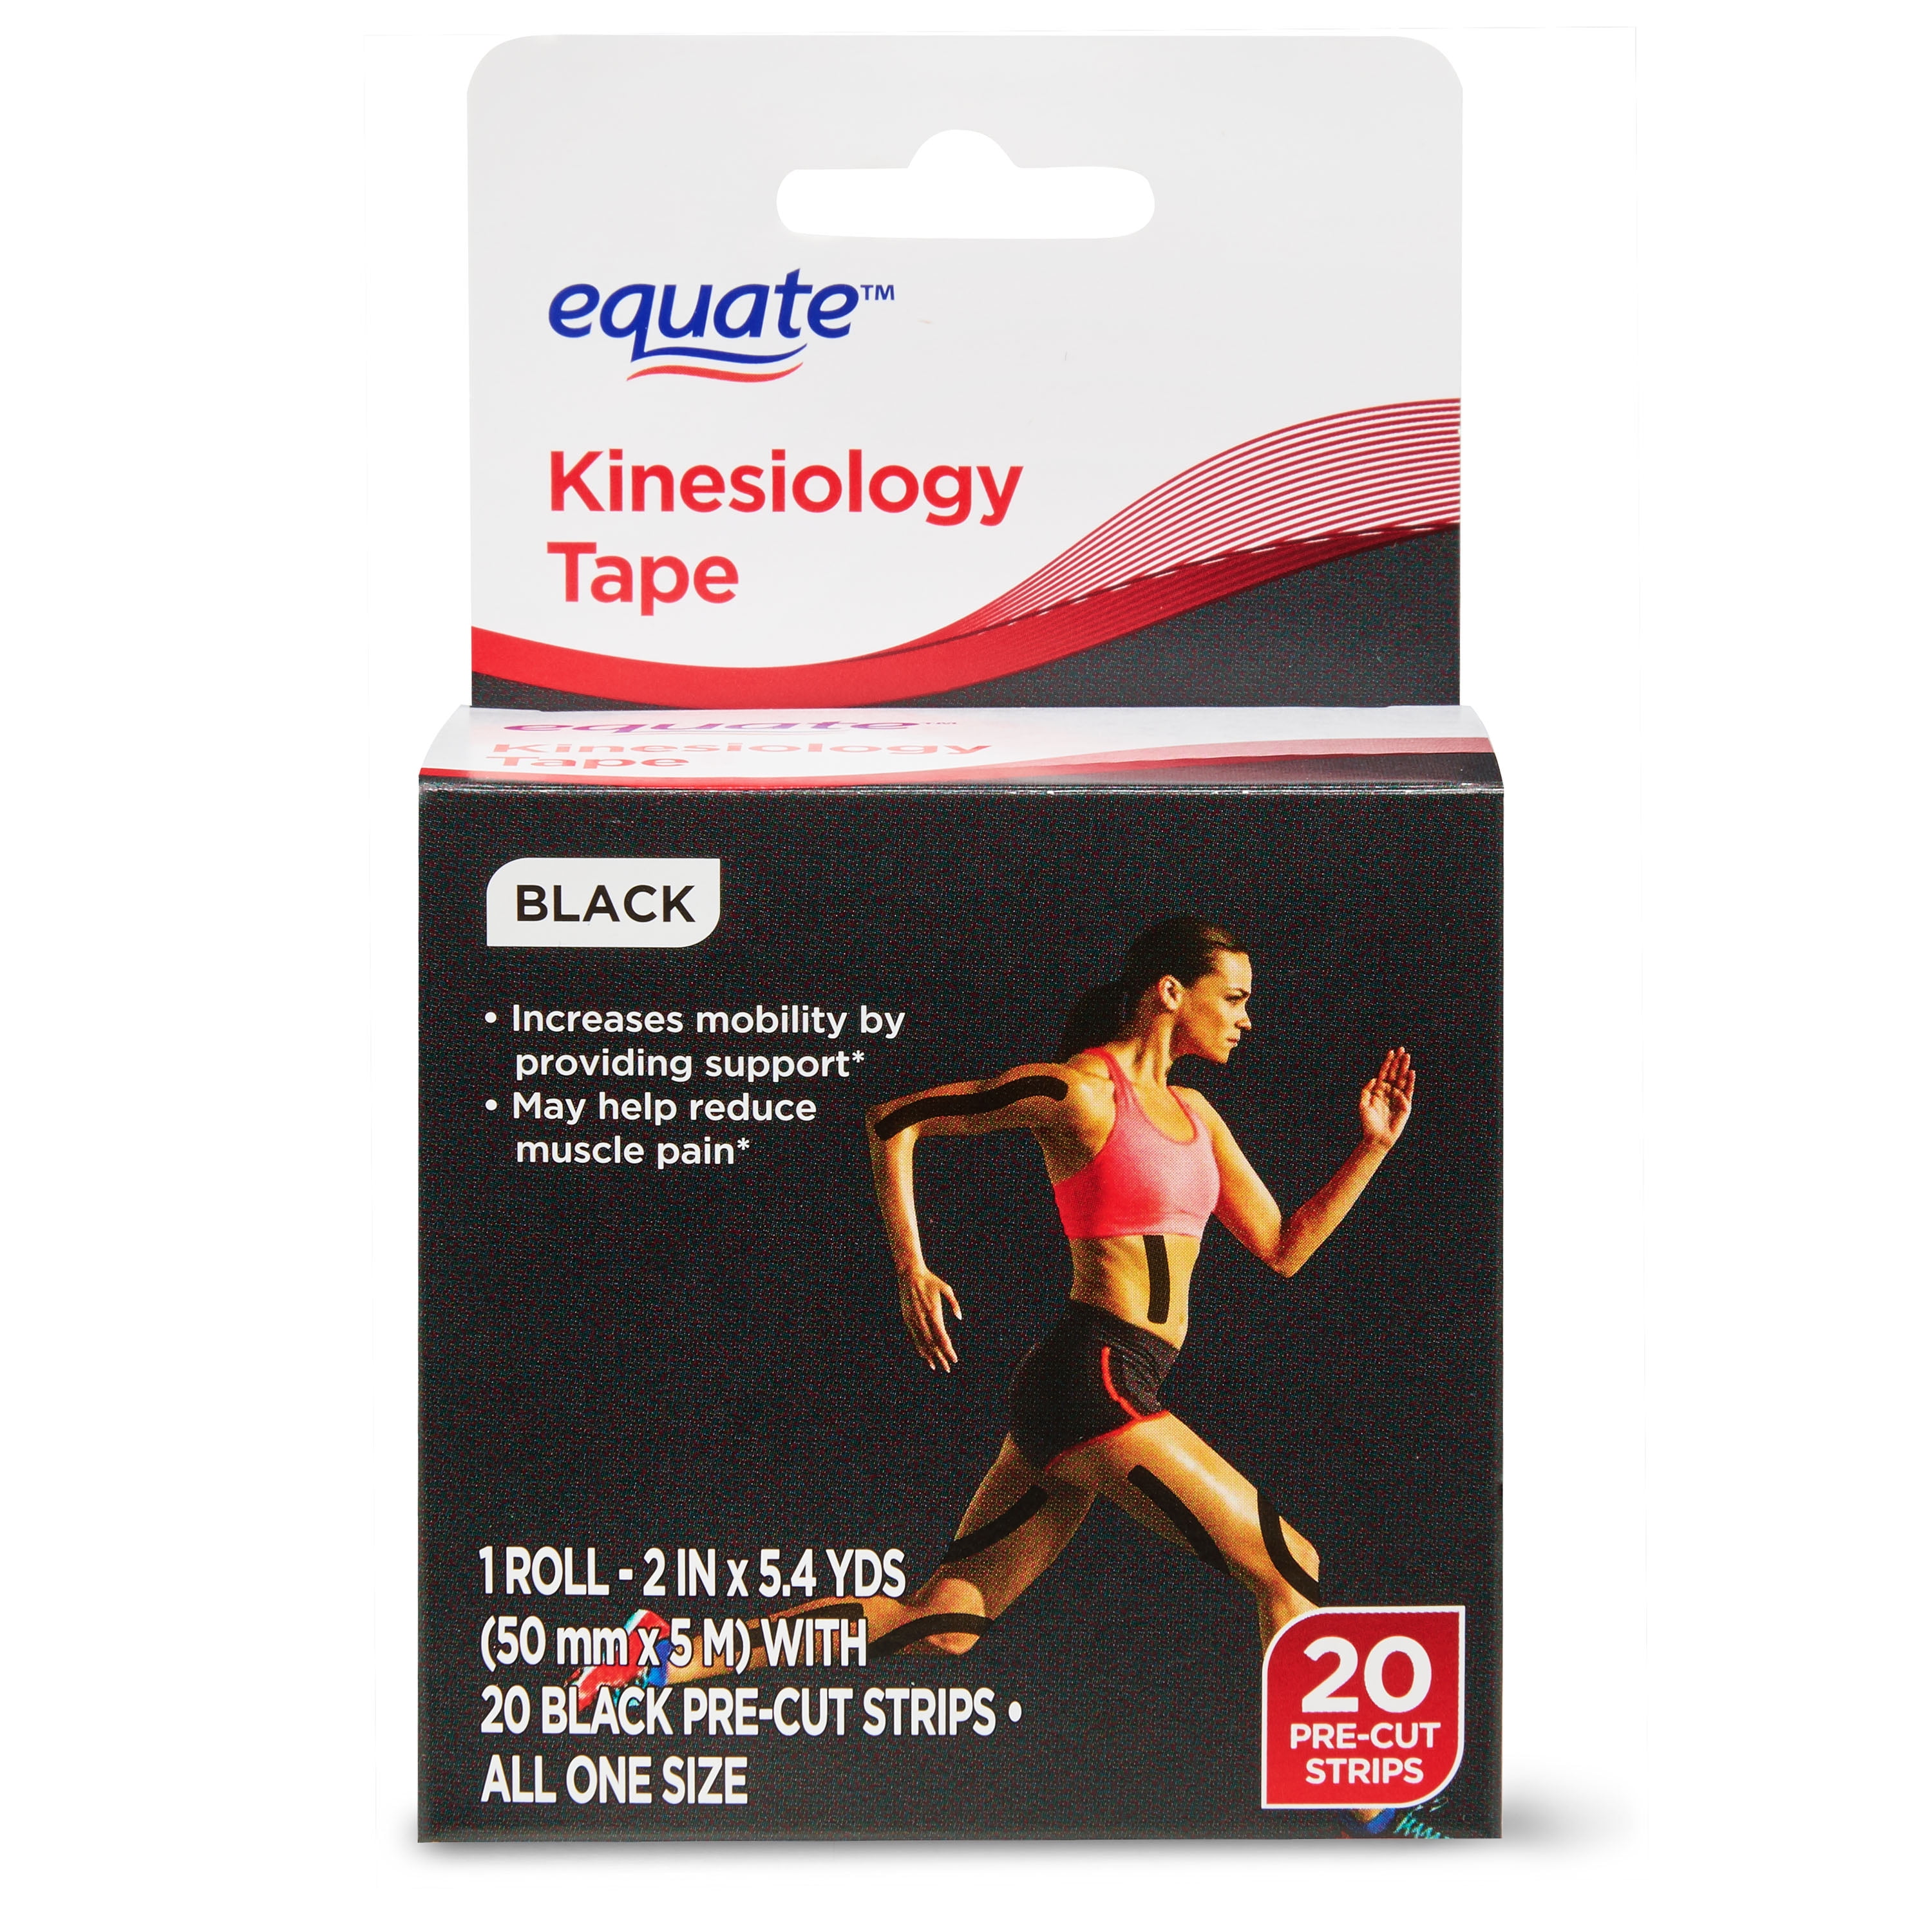 What's The Buzz Around Kinesiology Tape (K-tape)?